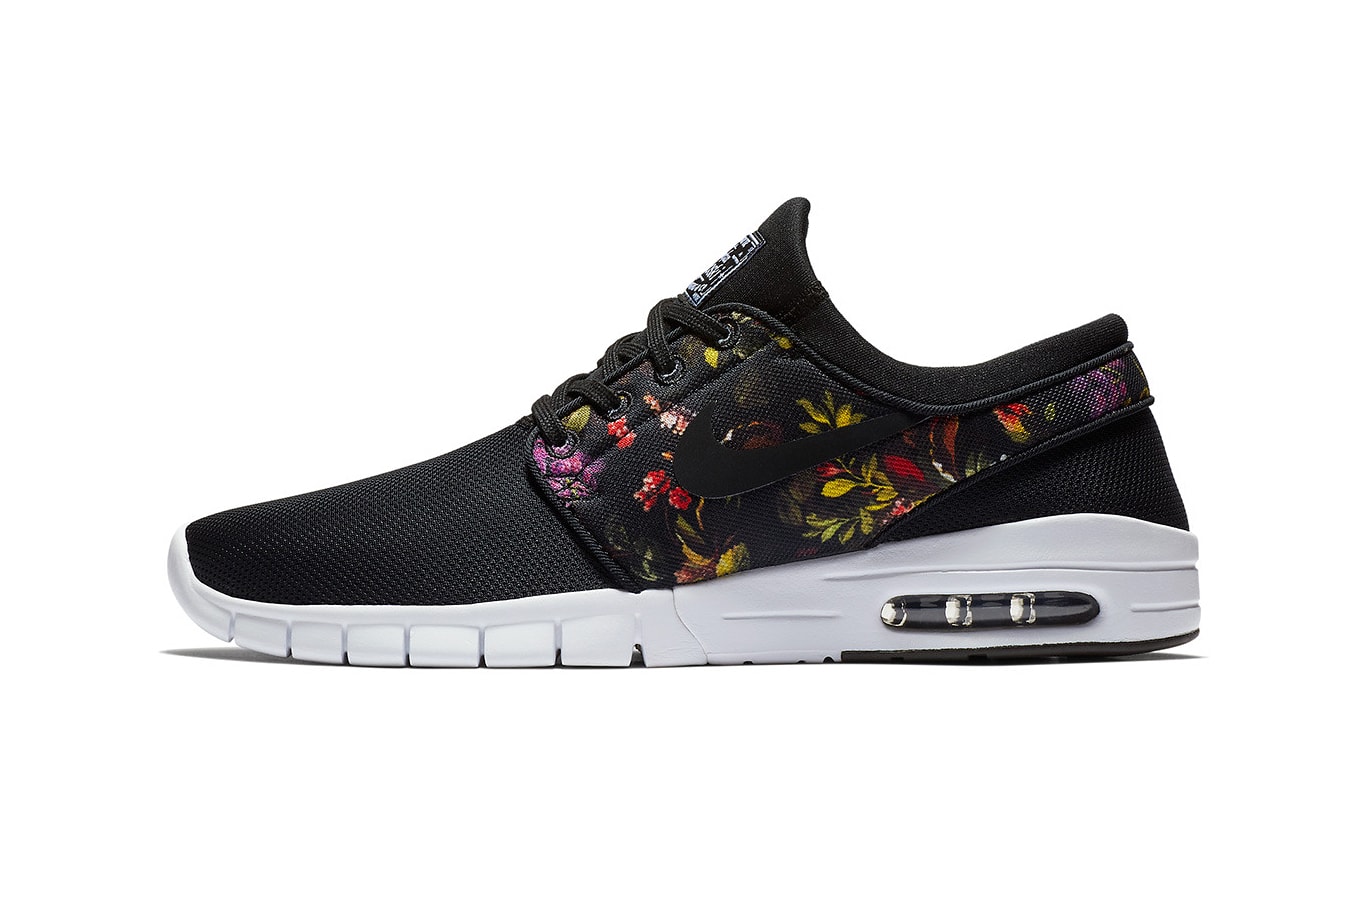 Nike SB Janoski Max Receives New Floral Colorway Hypebeast